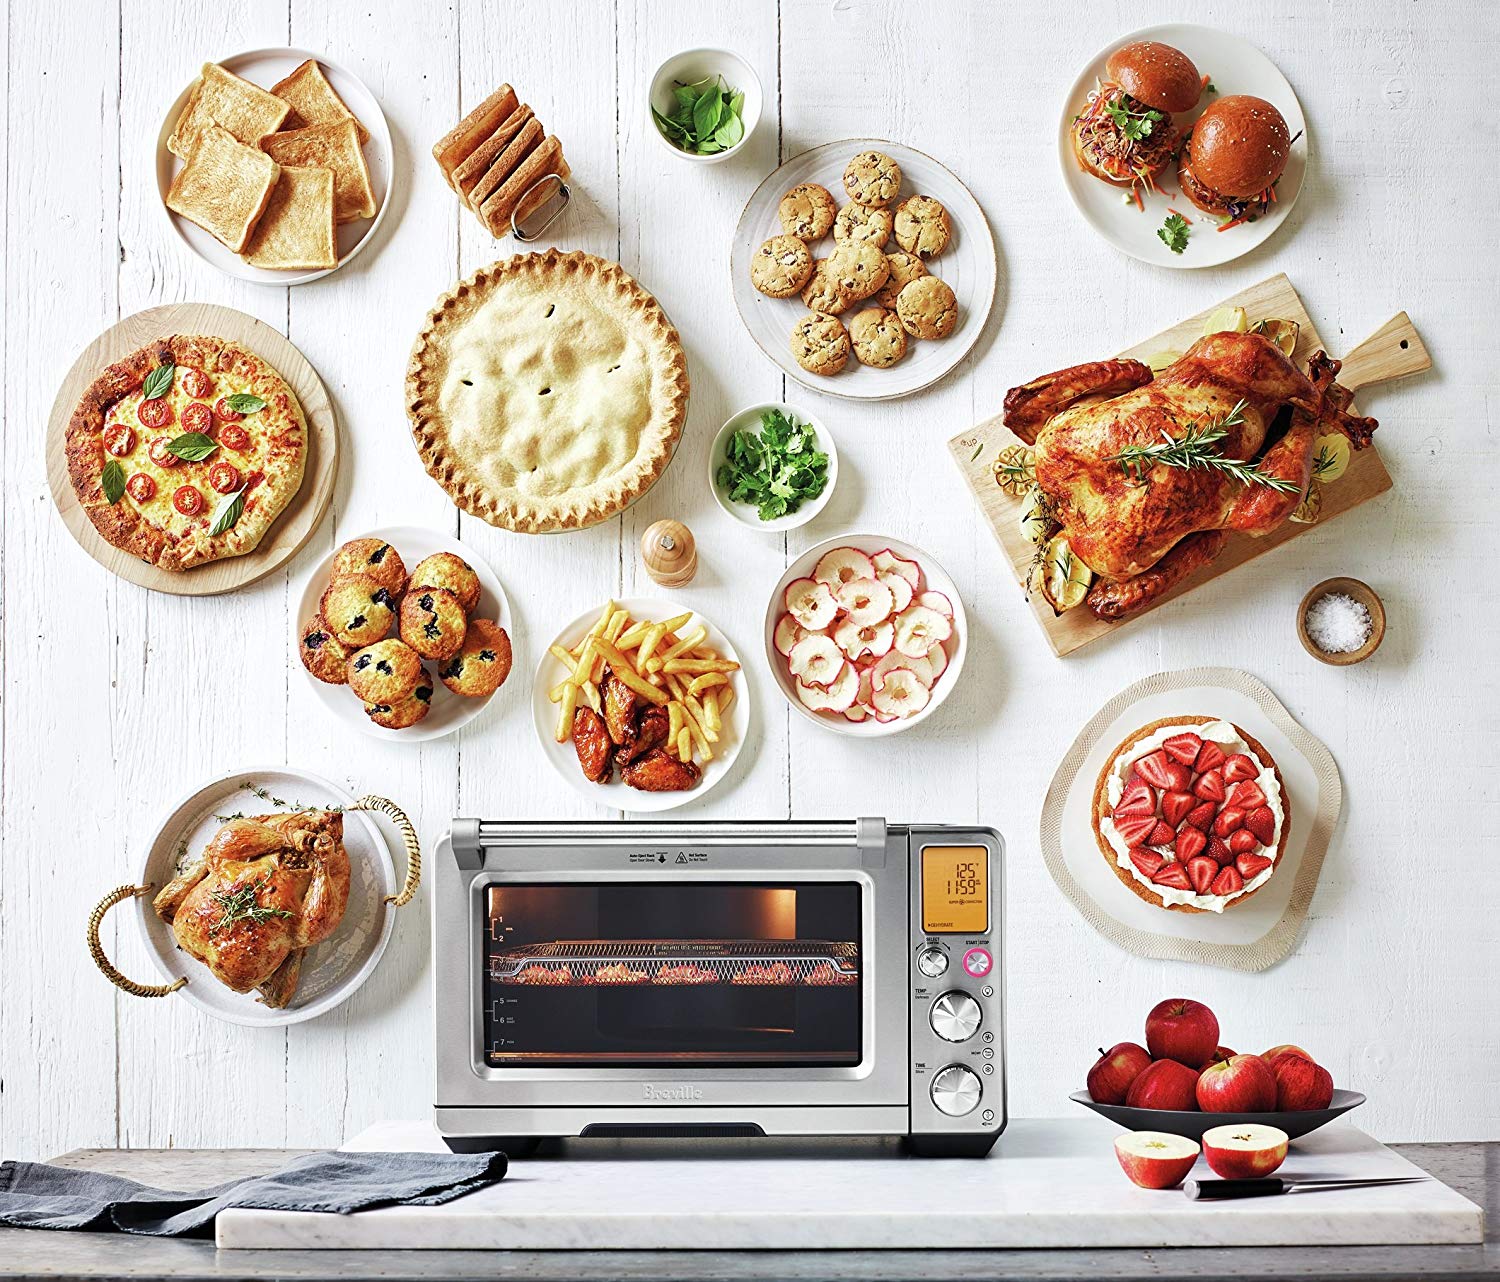 Breville BOV900BSS The Smart Oven Air